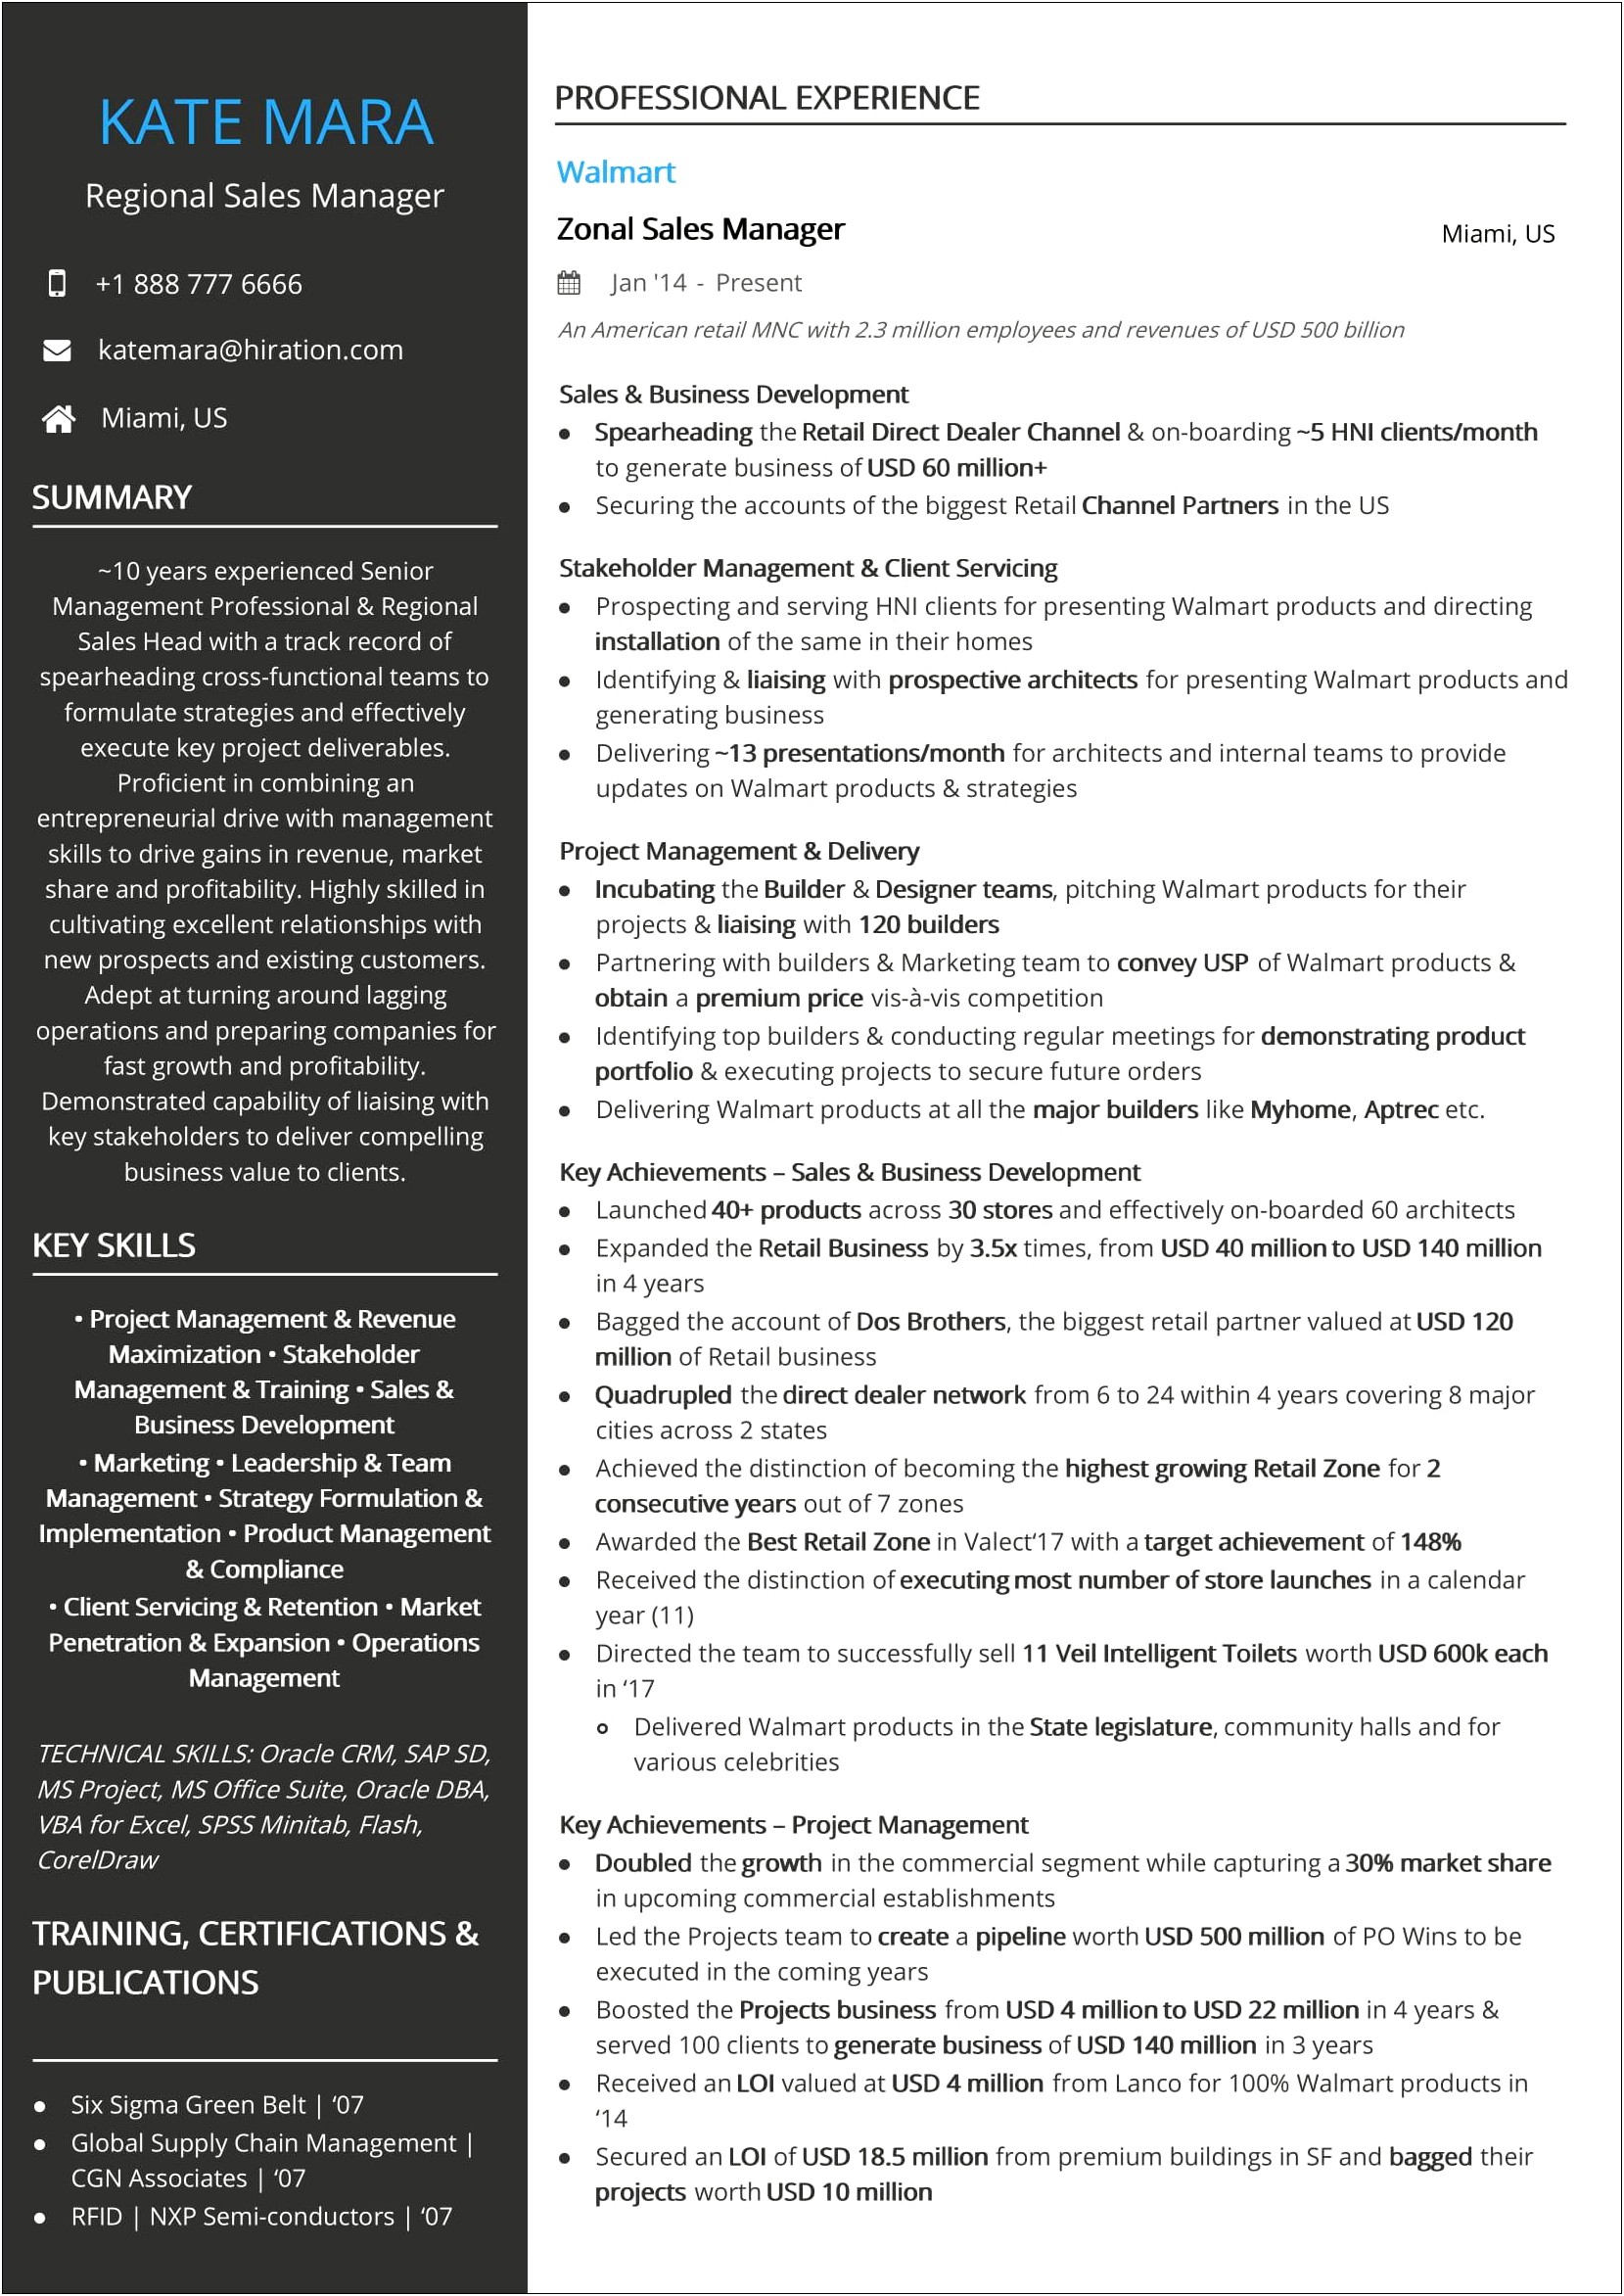 Skills For A Sales Manager Resume